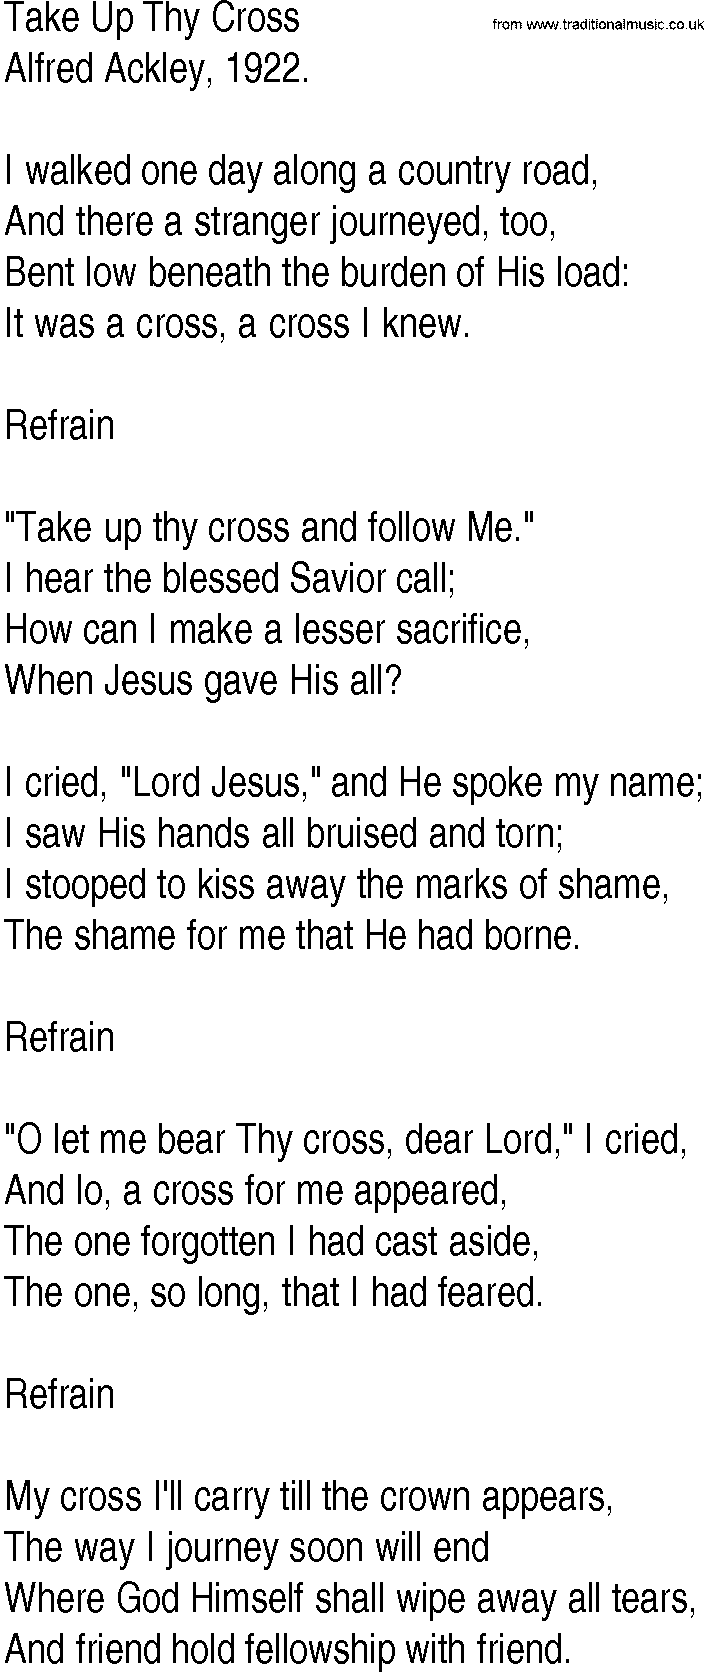 Hymn and Gospel Song: Take Up Thy Cross by Alfred Ackley lyrics